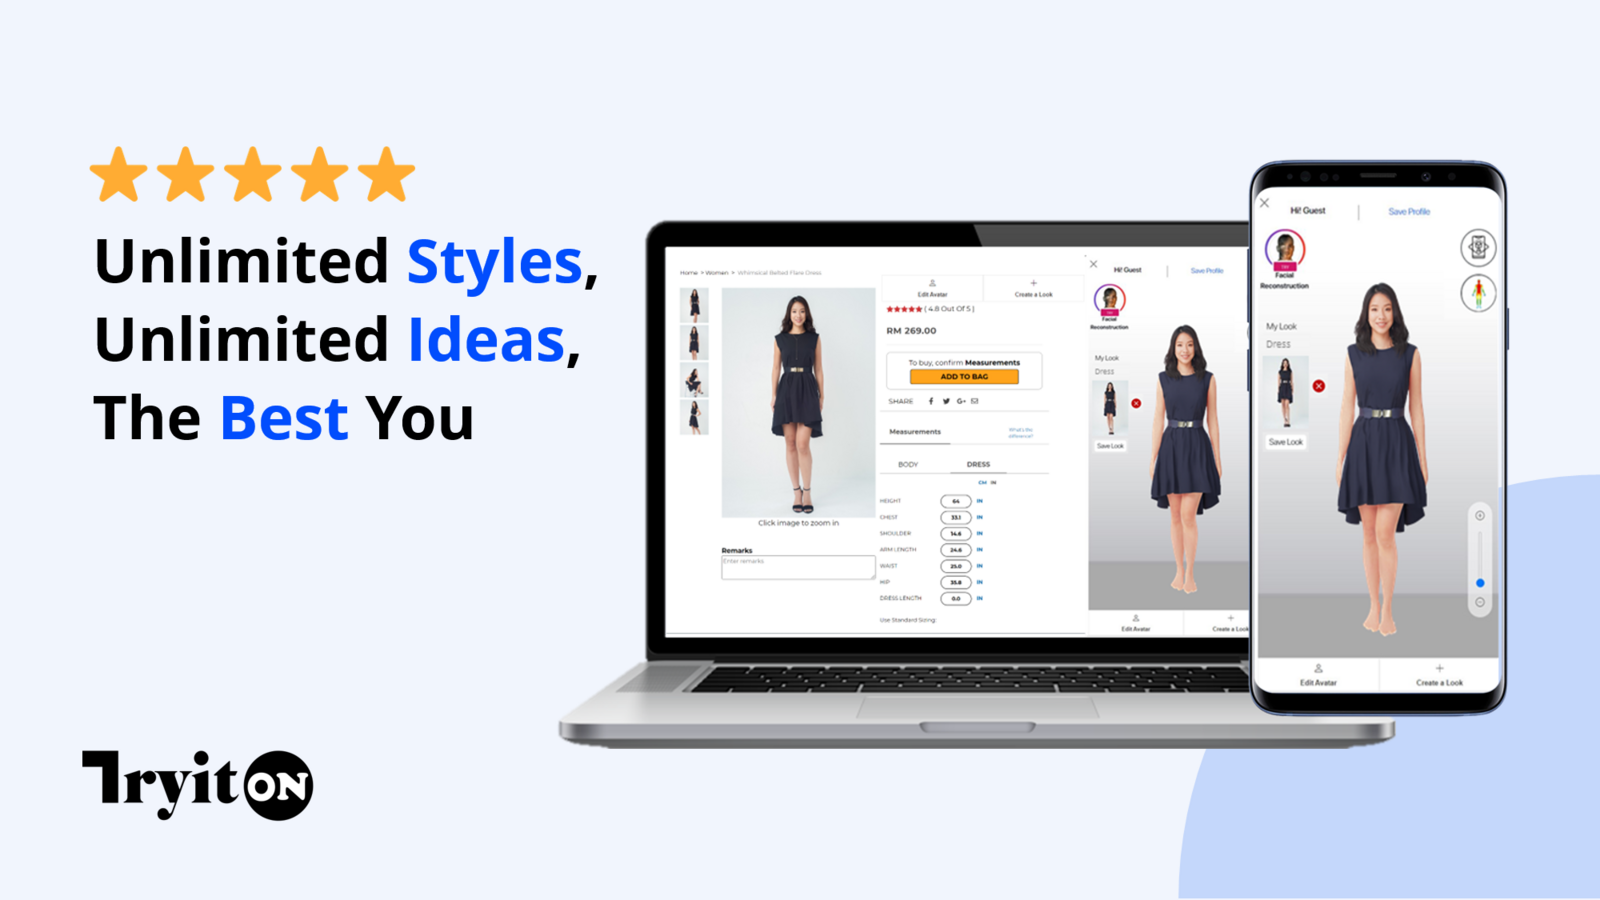 Unlimited Styles, Unlimited Ideas, The Best You